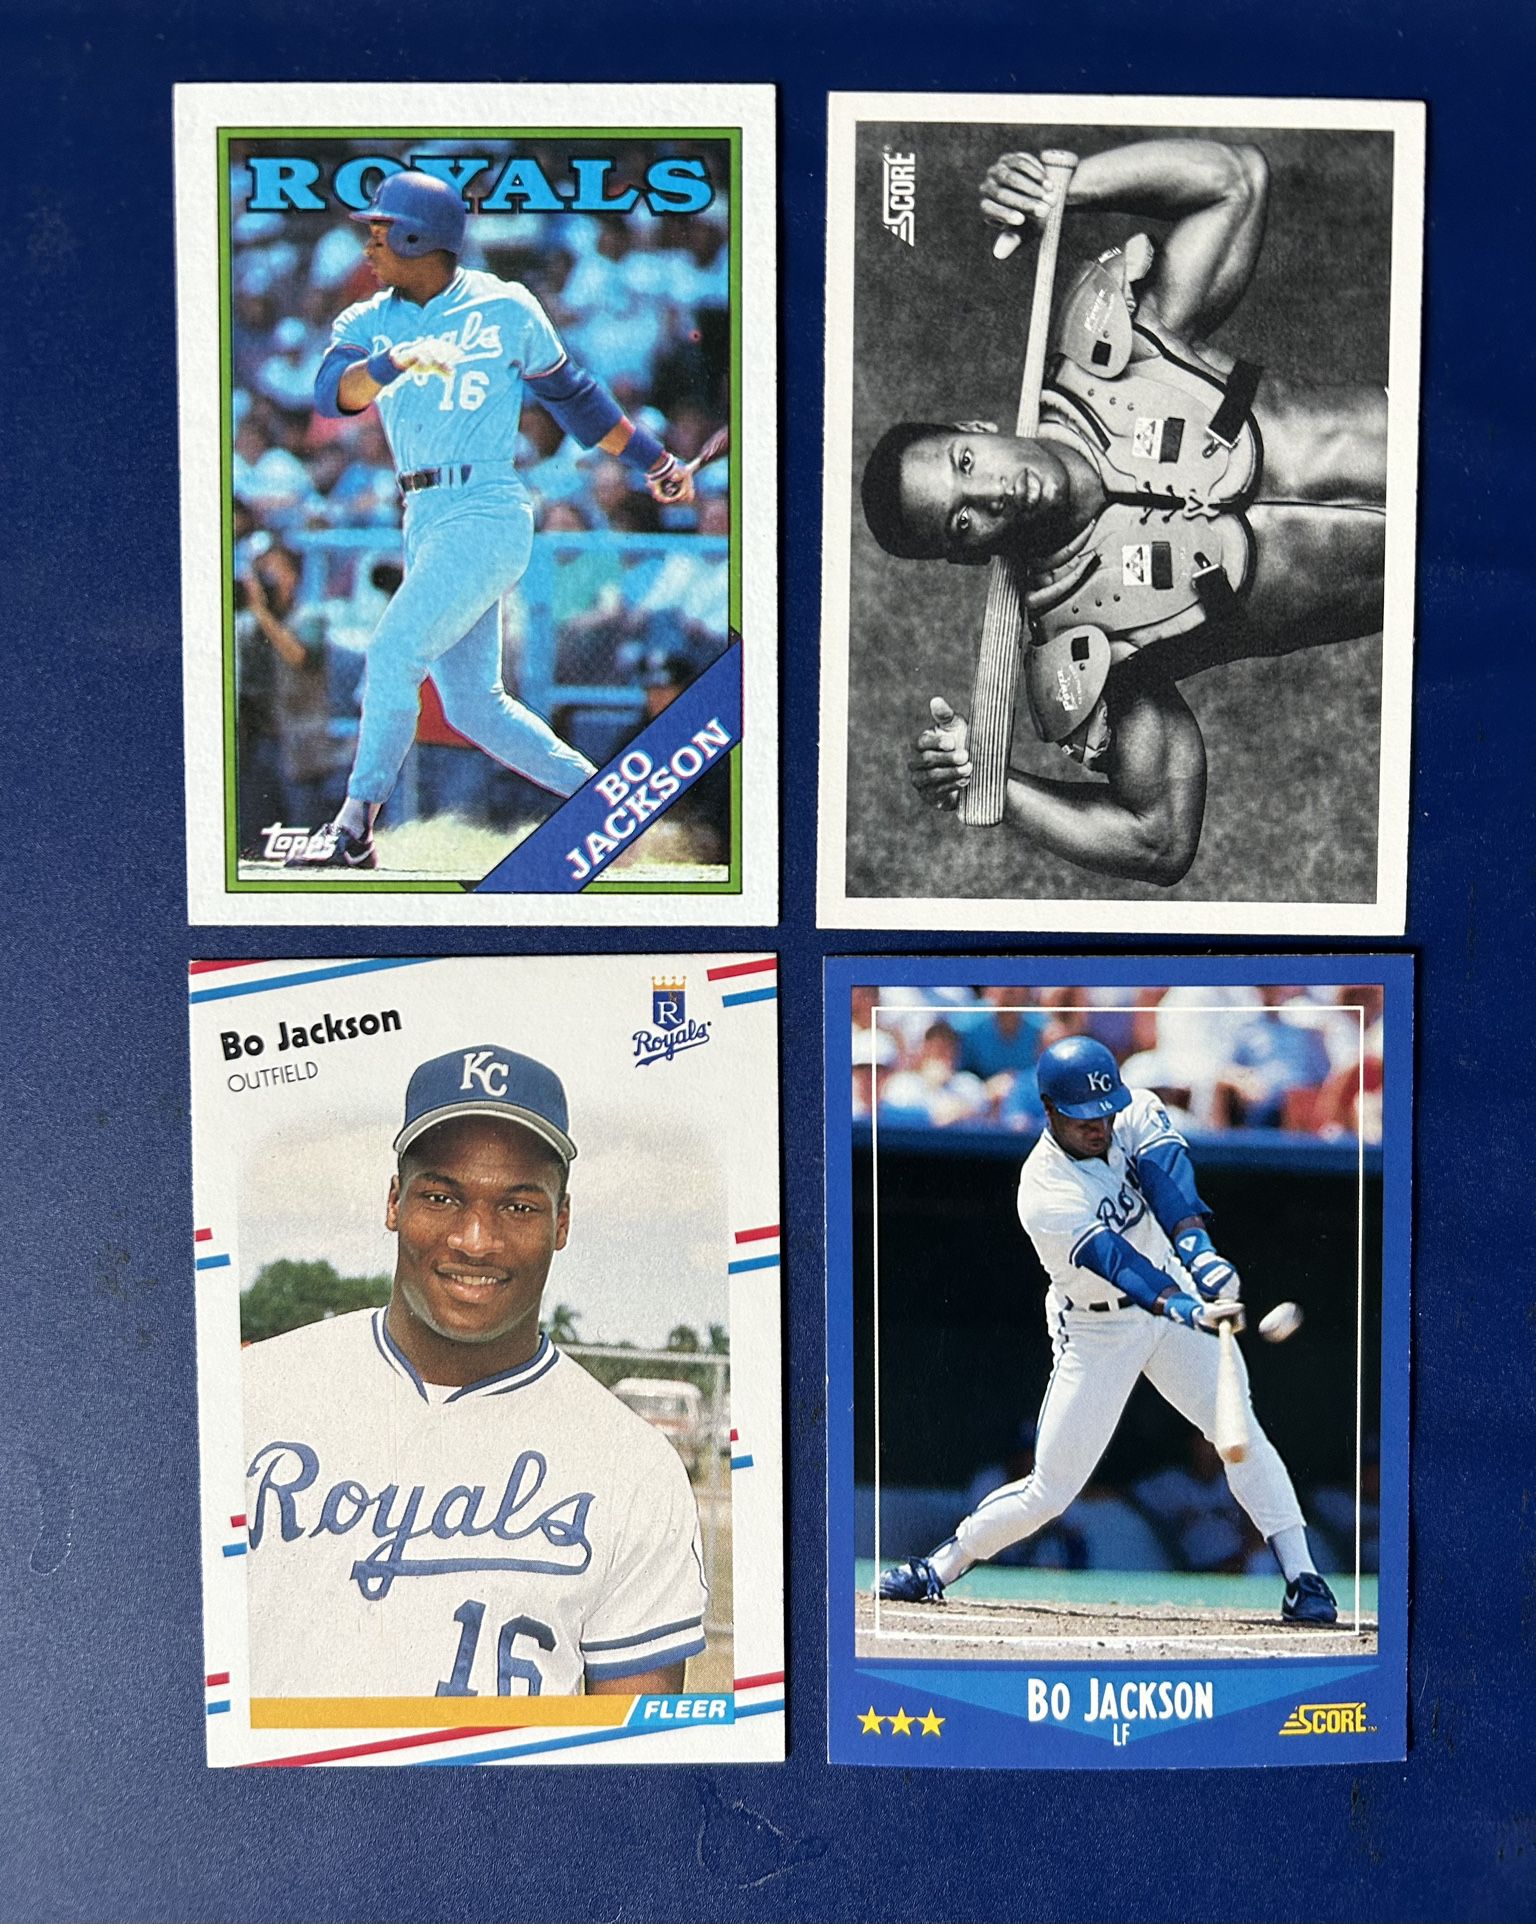 Bo Jackson Baseball Card Lot for Sale in Columbia, MO - OfferUp